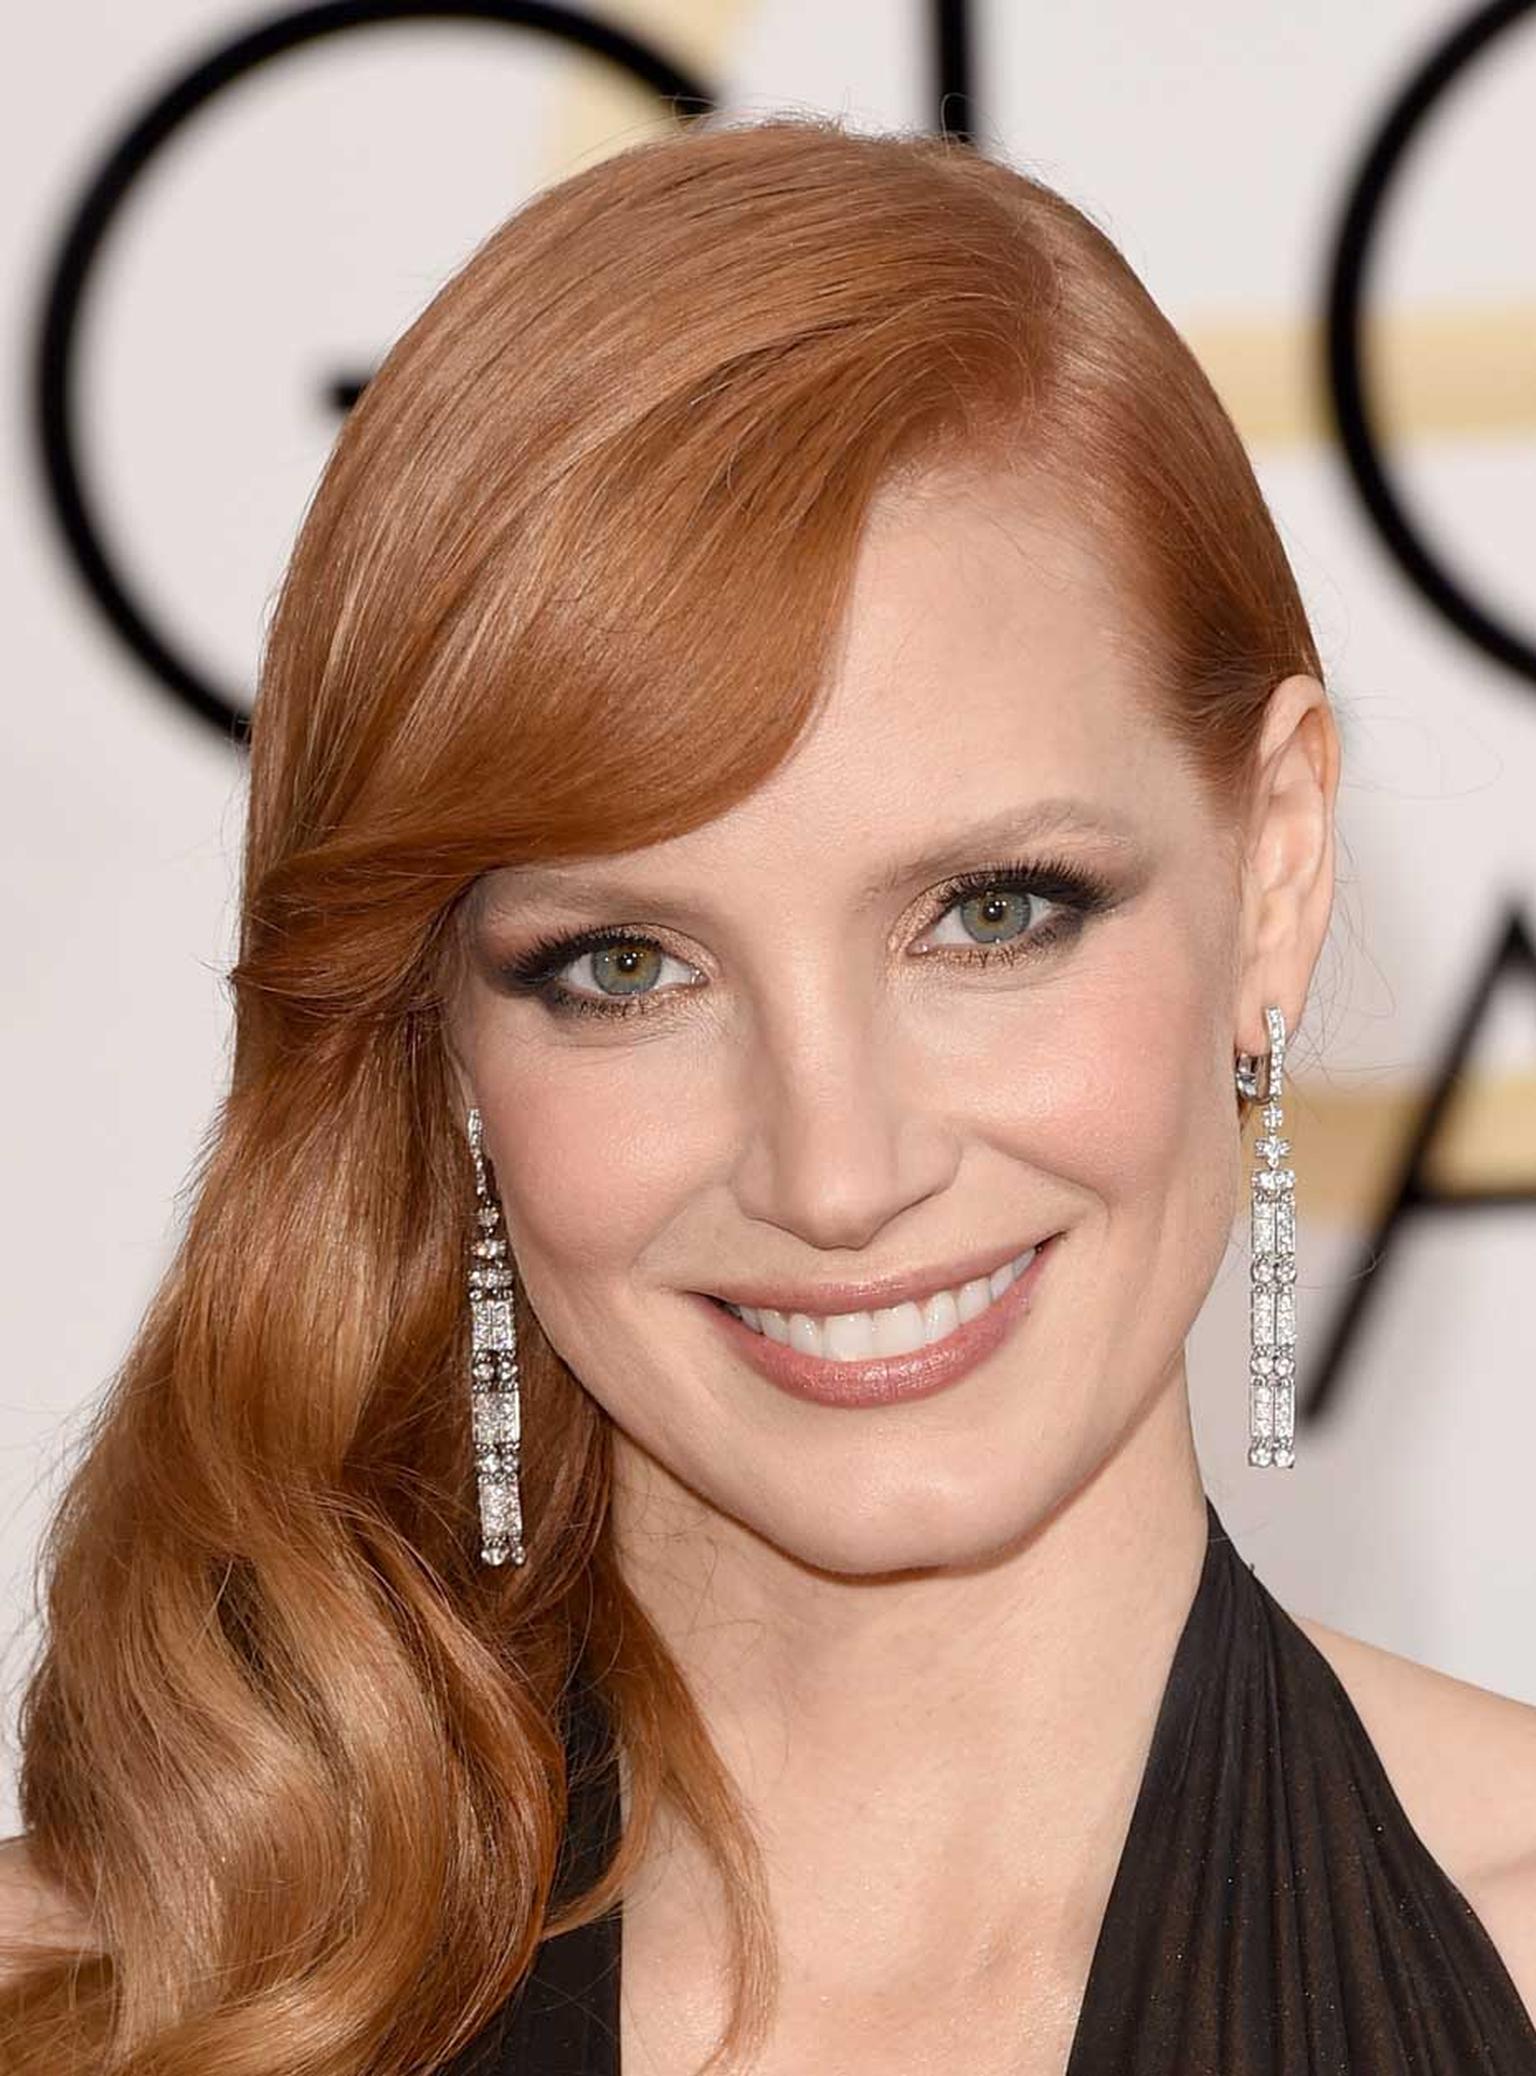 The Piaget Limelight Couture Précieuse Earrings in white gold with diamonds worn at the 2015 Golden Globes by American actress Jessica Chastain.